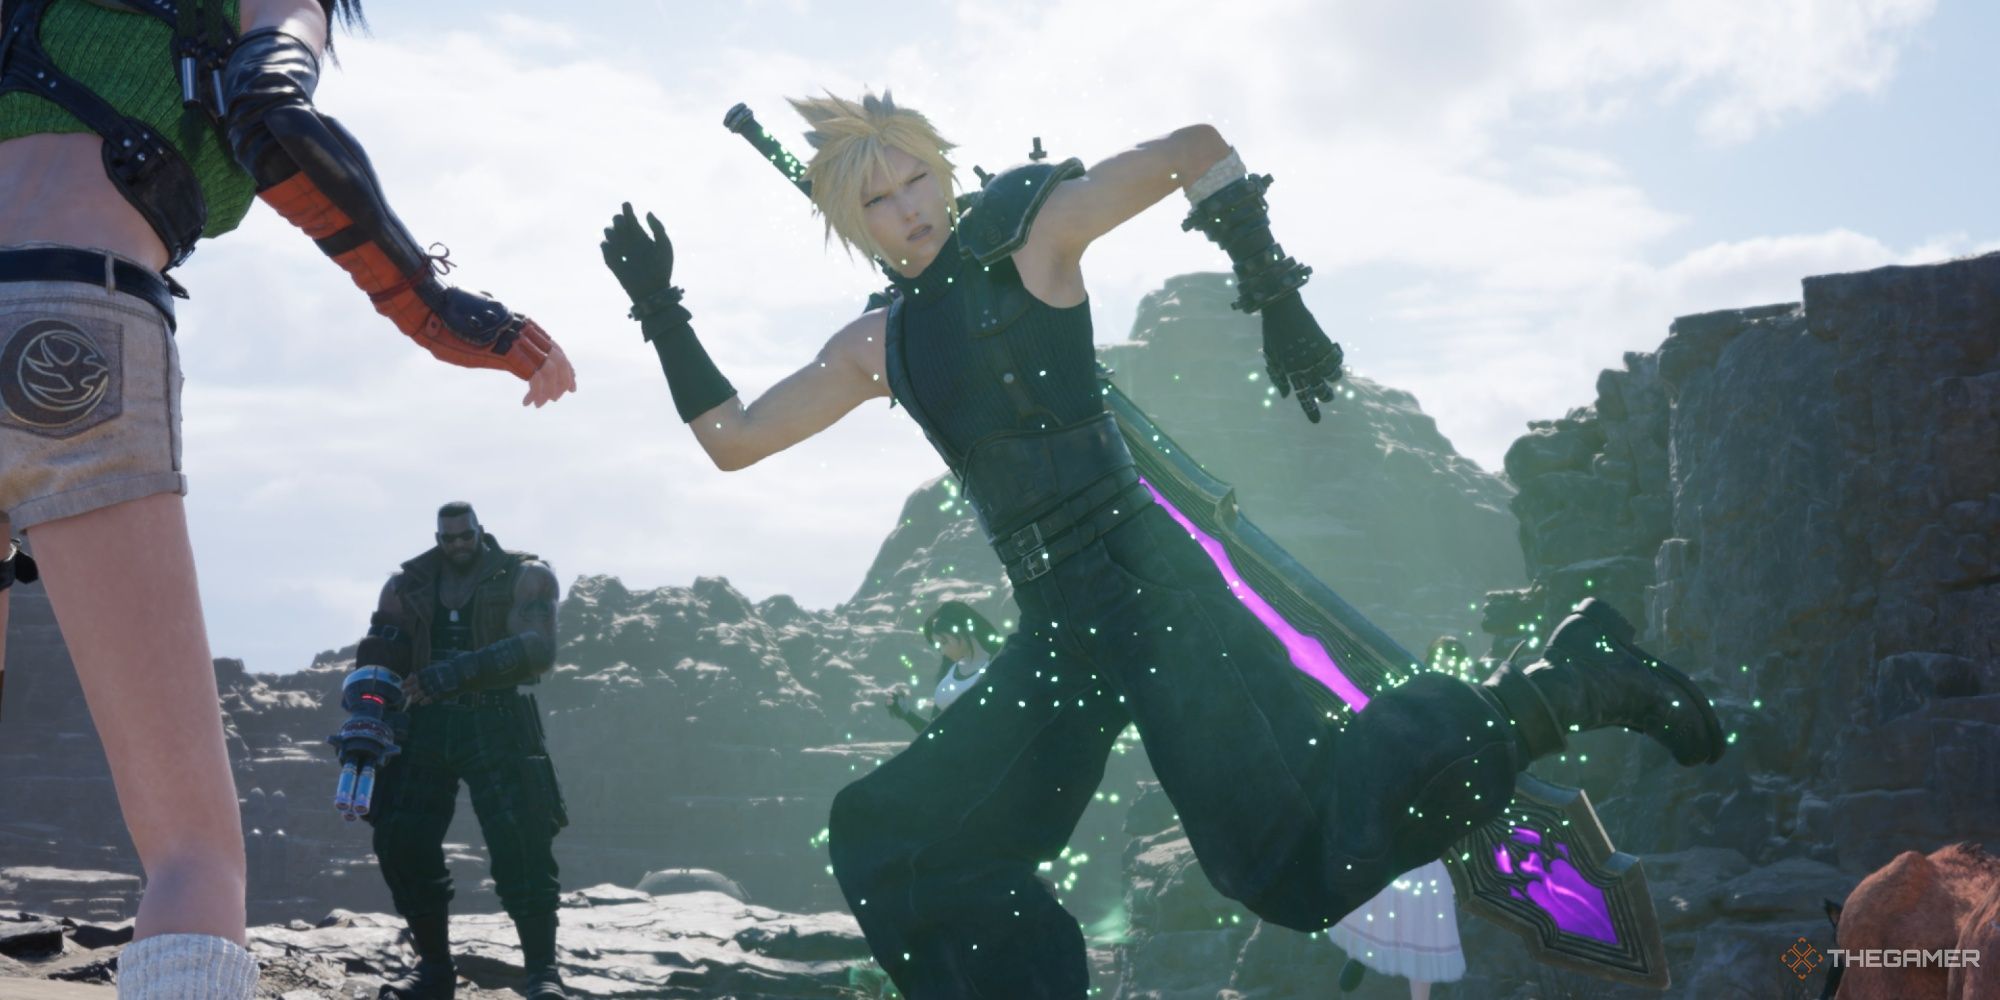 Final Fantasy 7 Rebirth Cloud standing in a cactuar pose while the party look on